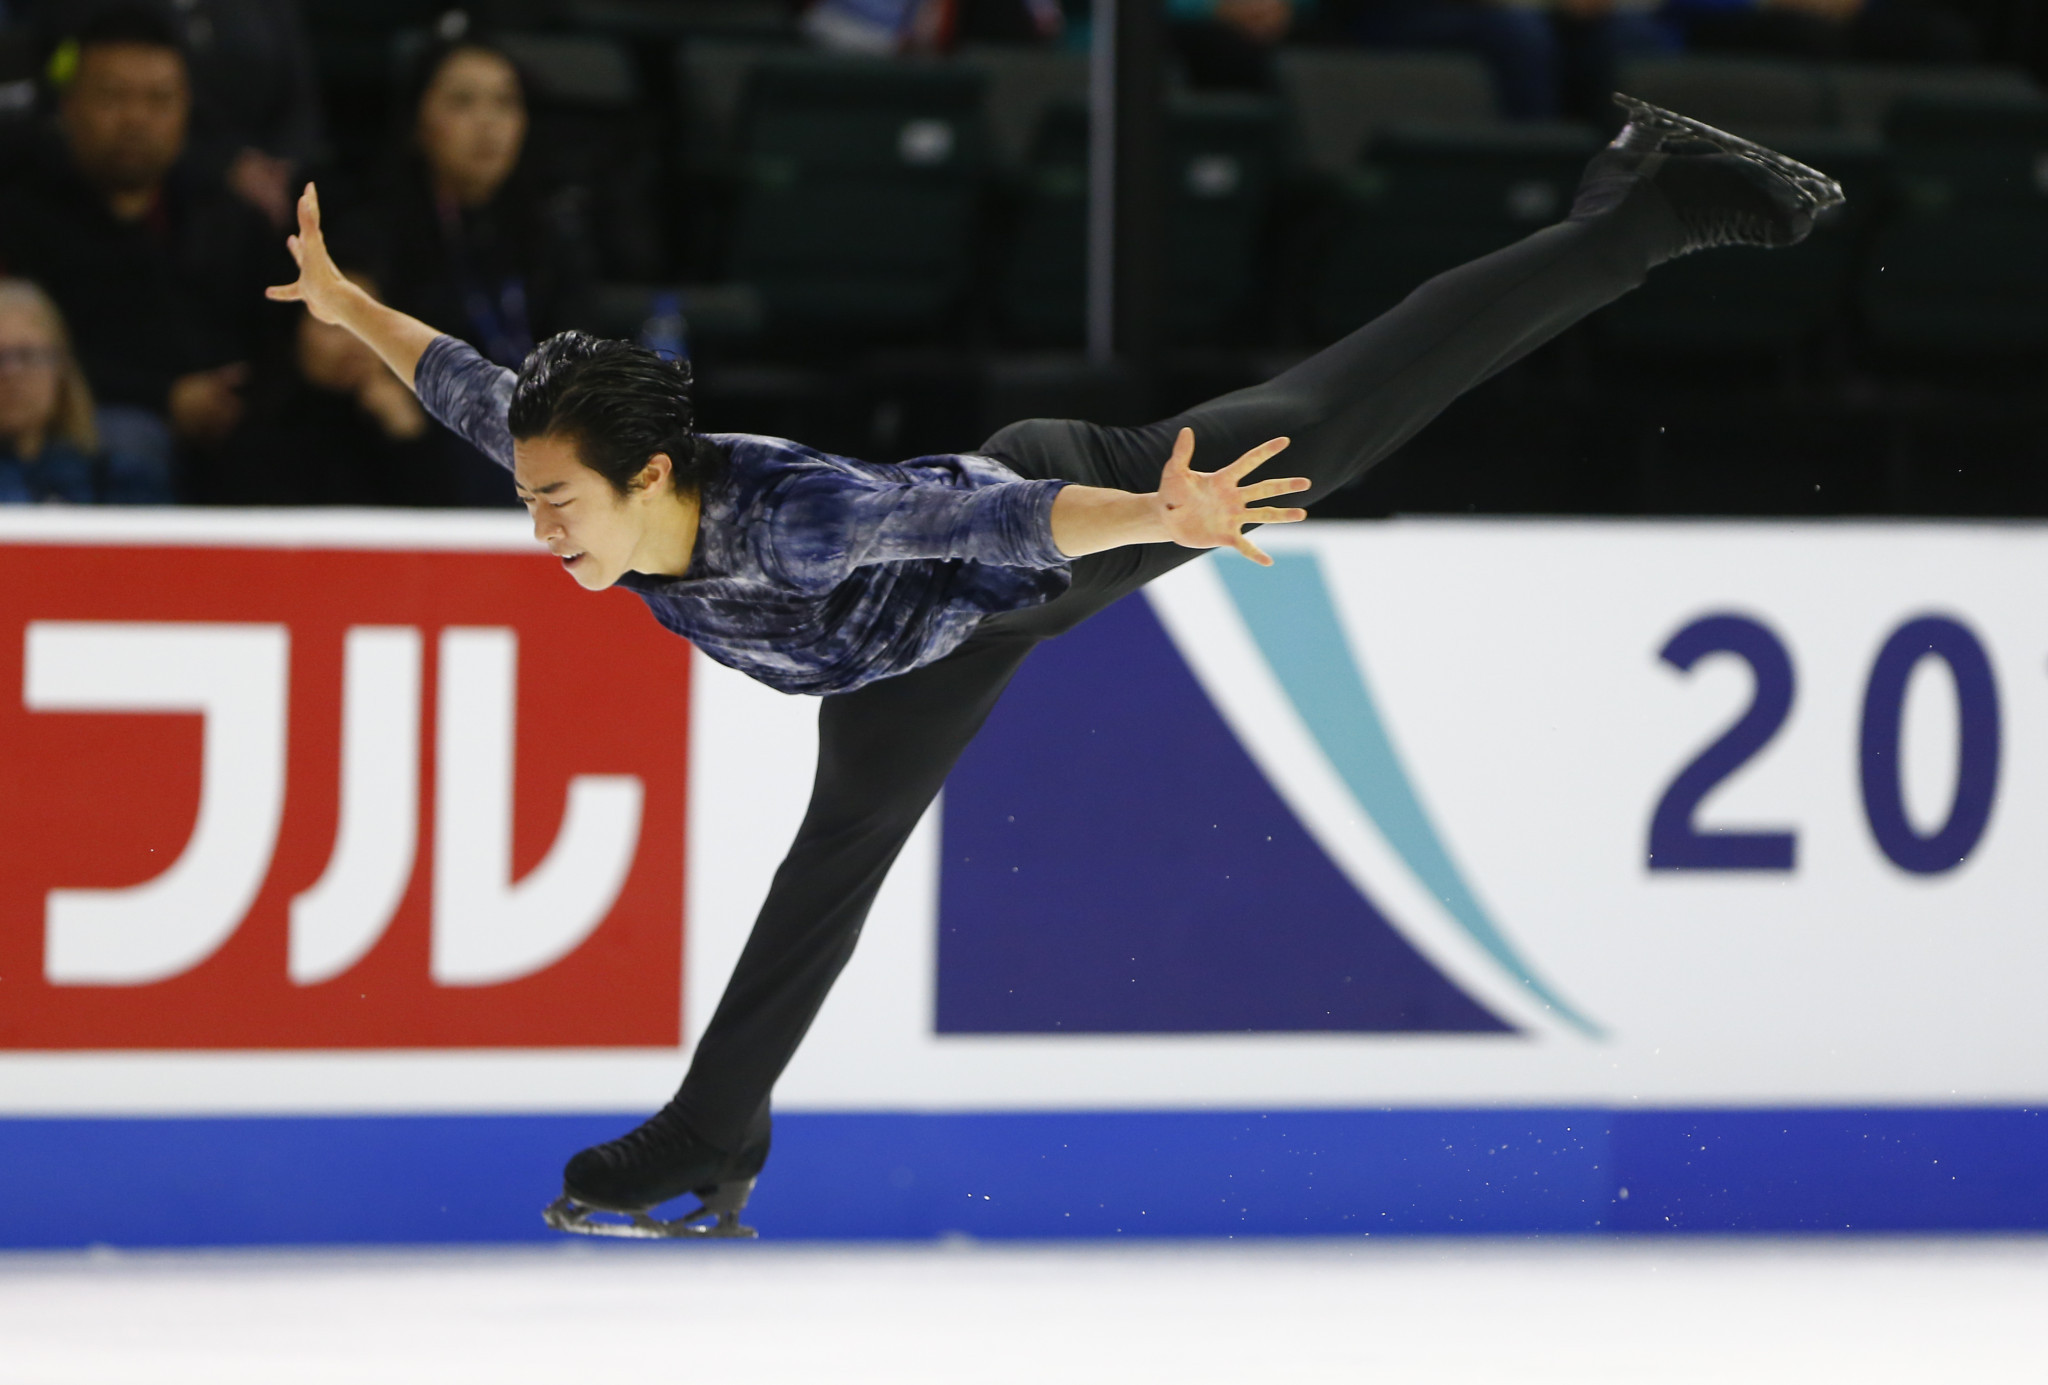 Chen seals comprehensive home victory at Skate America